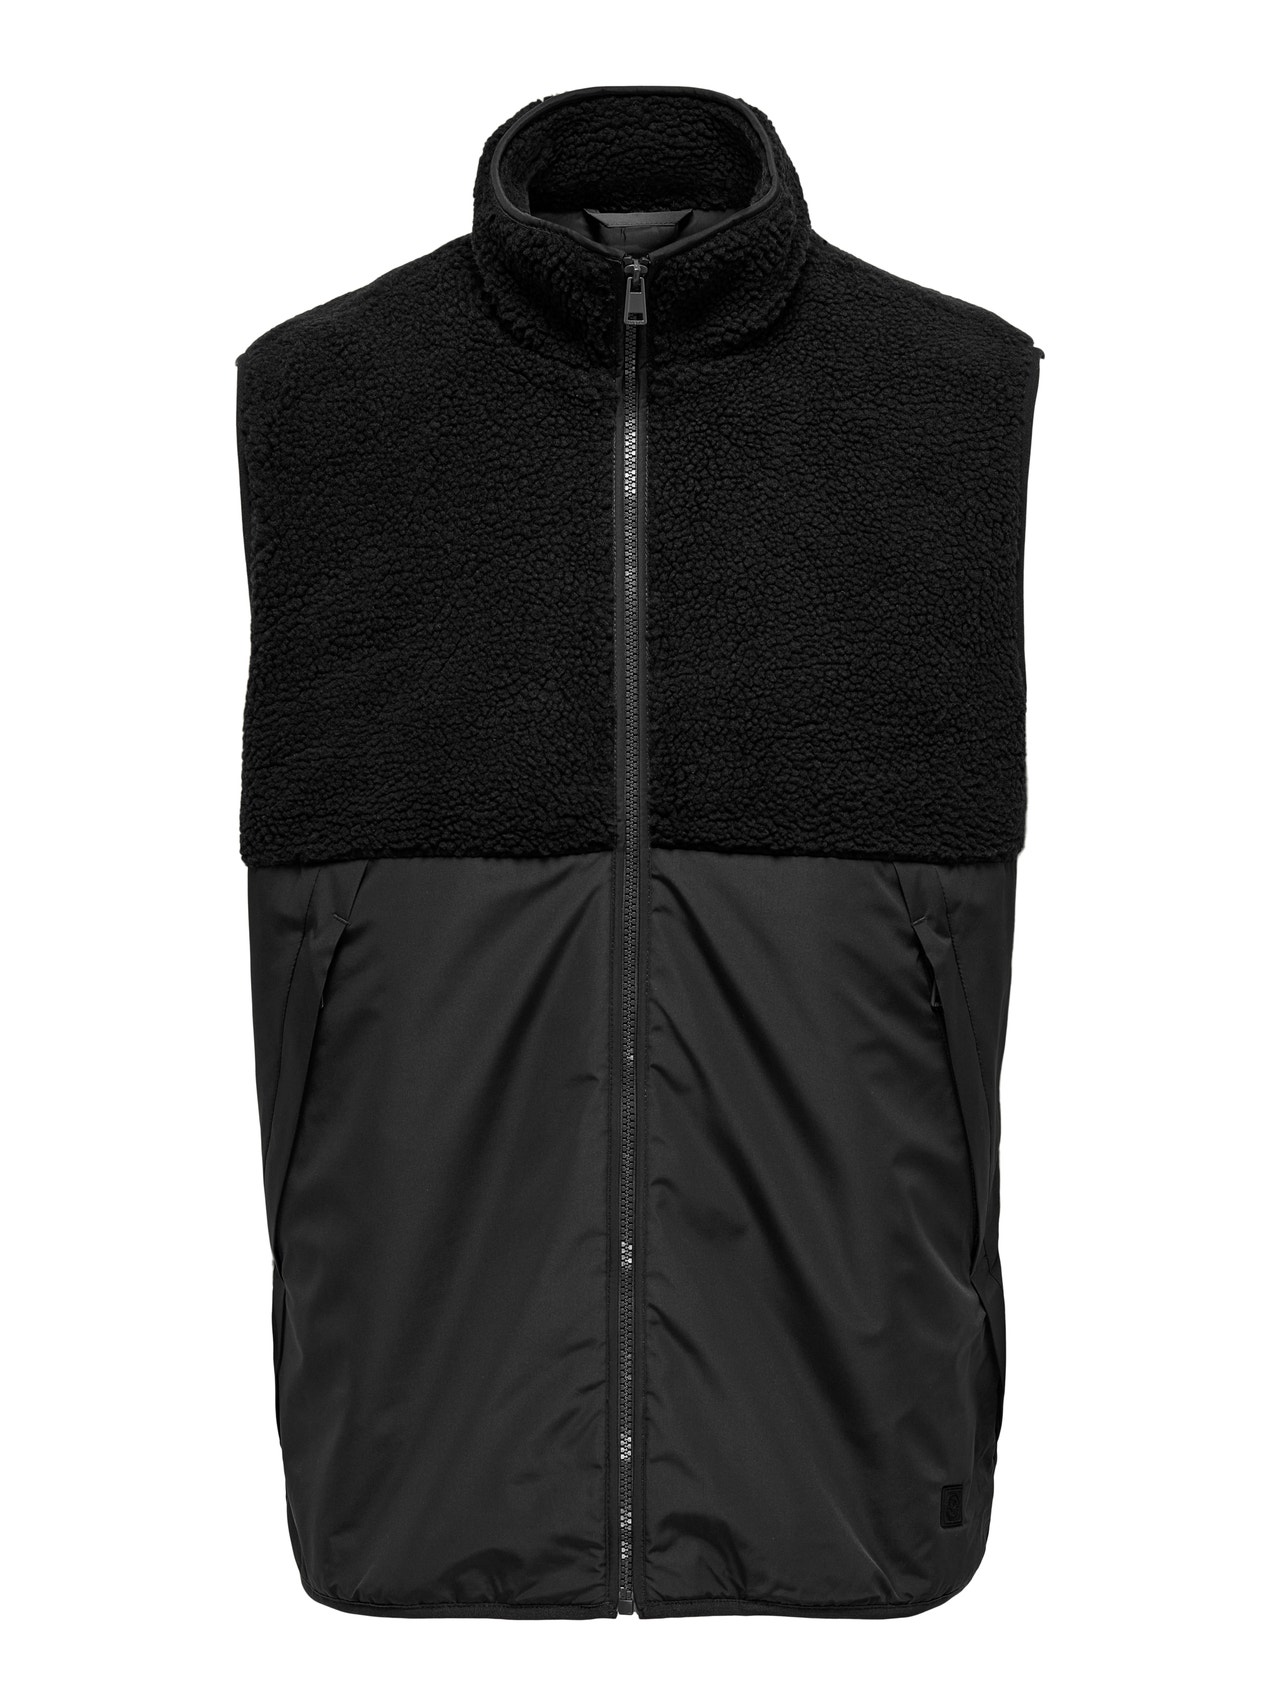 ONLY & SONS Gilets anti-froid -Black - 22022513